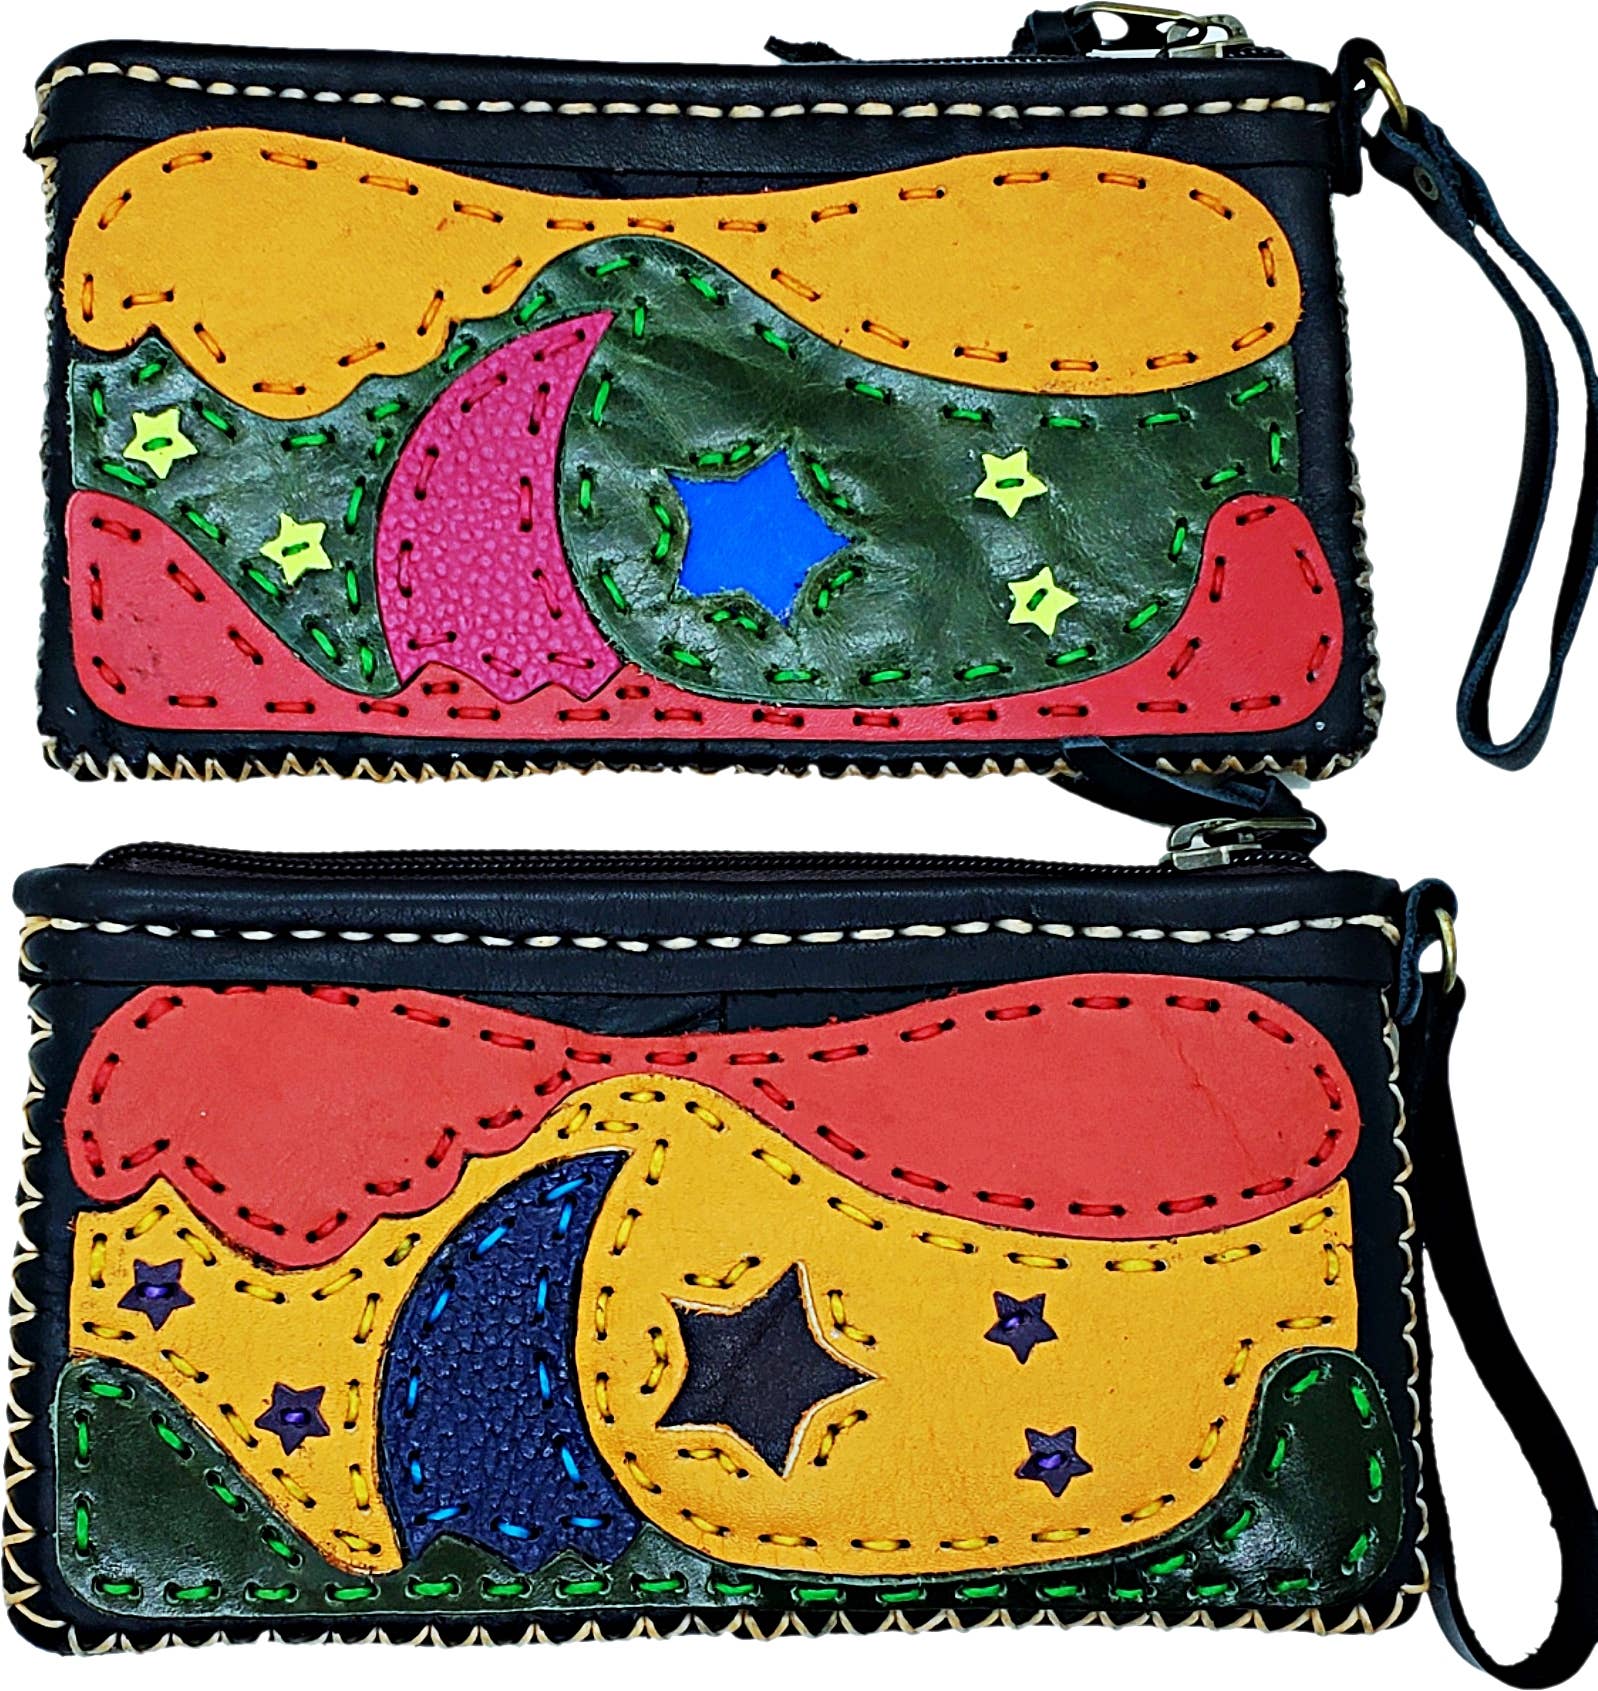 Leather Collage Art Clutch/ Wallet - Moon & Star - Spiral Circle